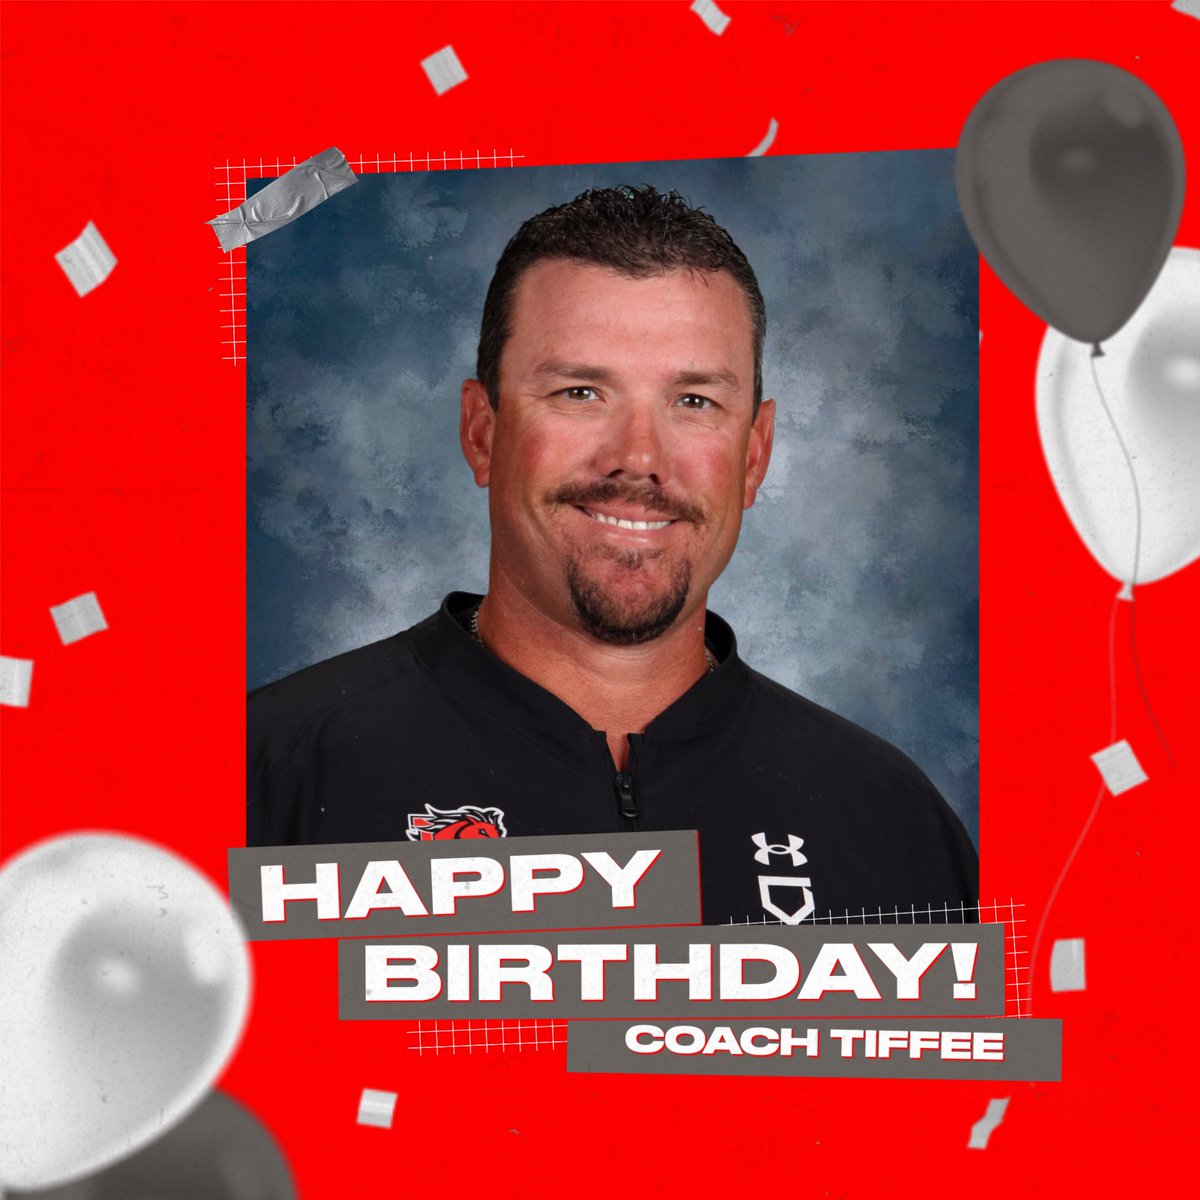 Happy Birthday to Coach Tiffee & Coach Redwine, we hope you have the best day!